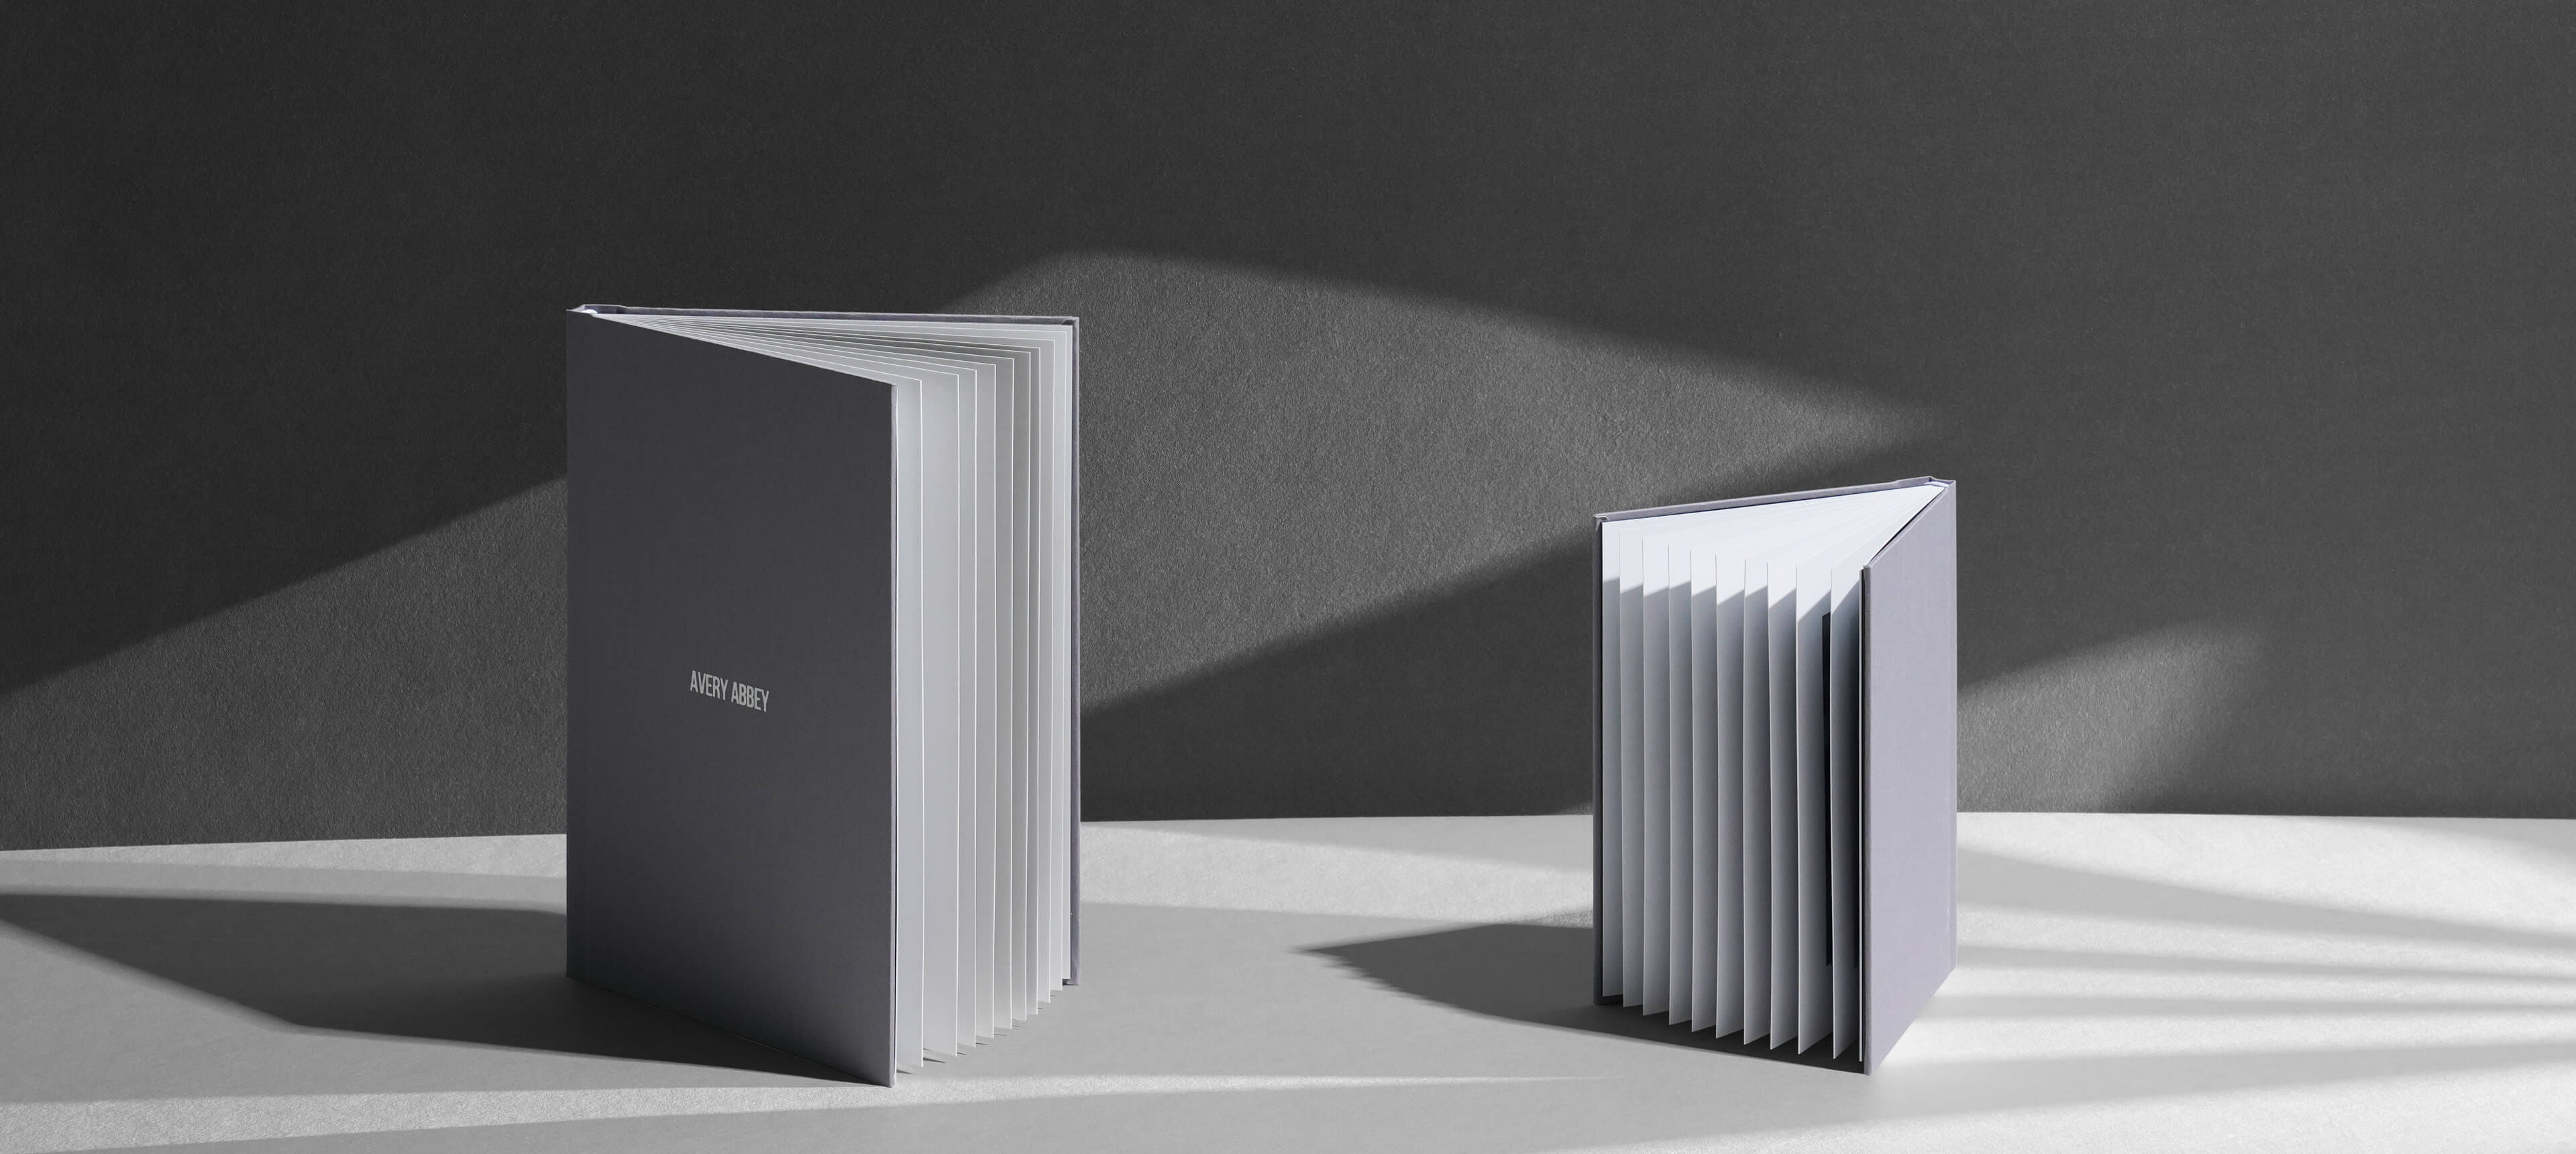 one big slim photo book standing up next to a smaller slim photo book